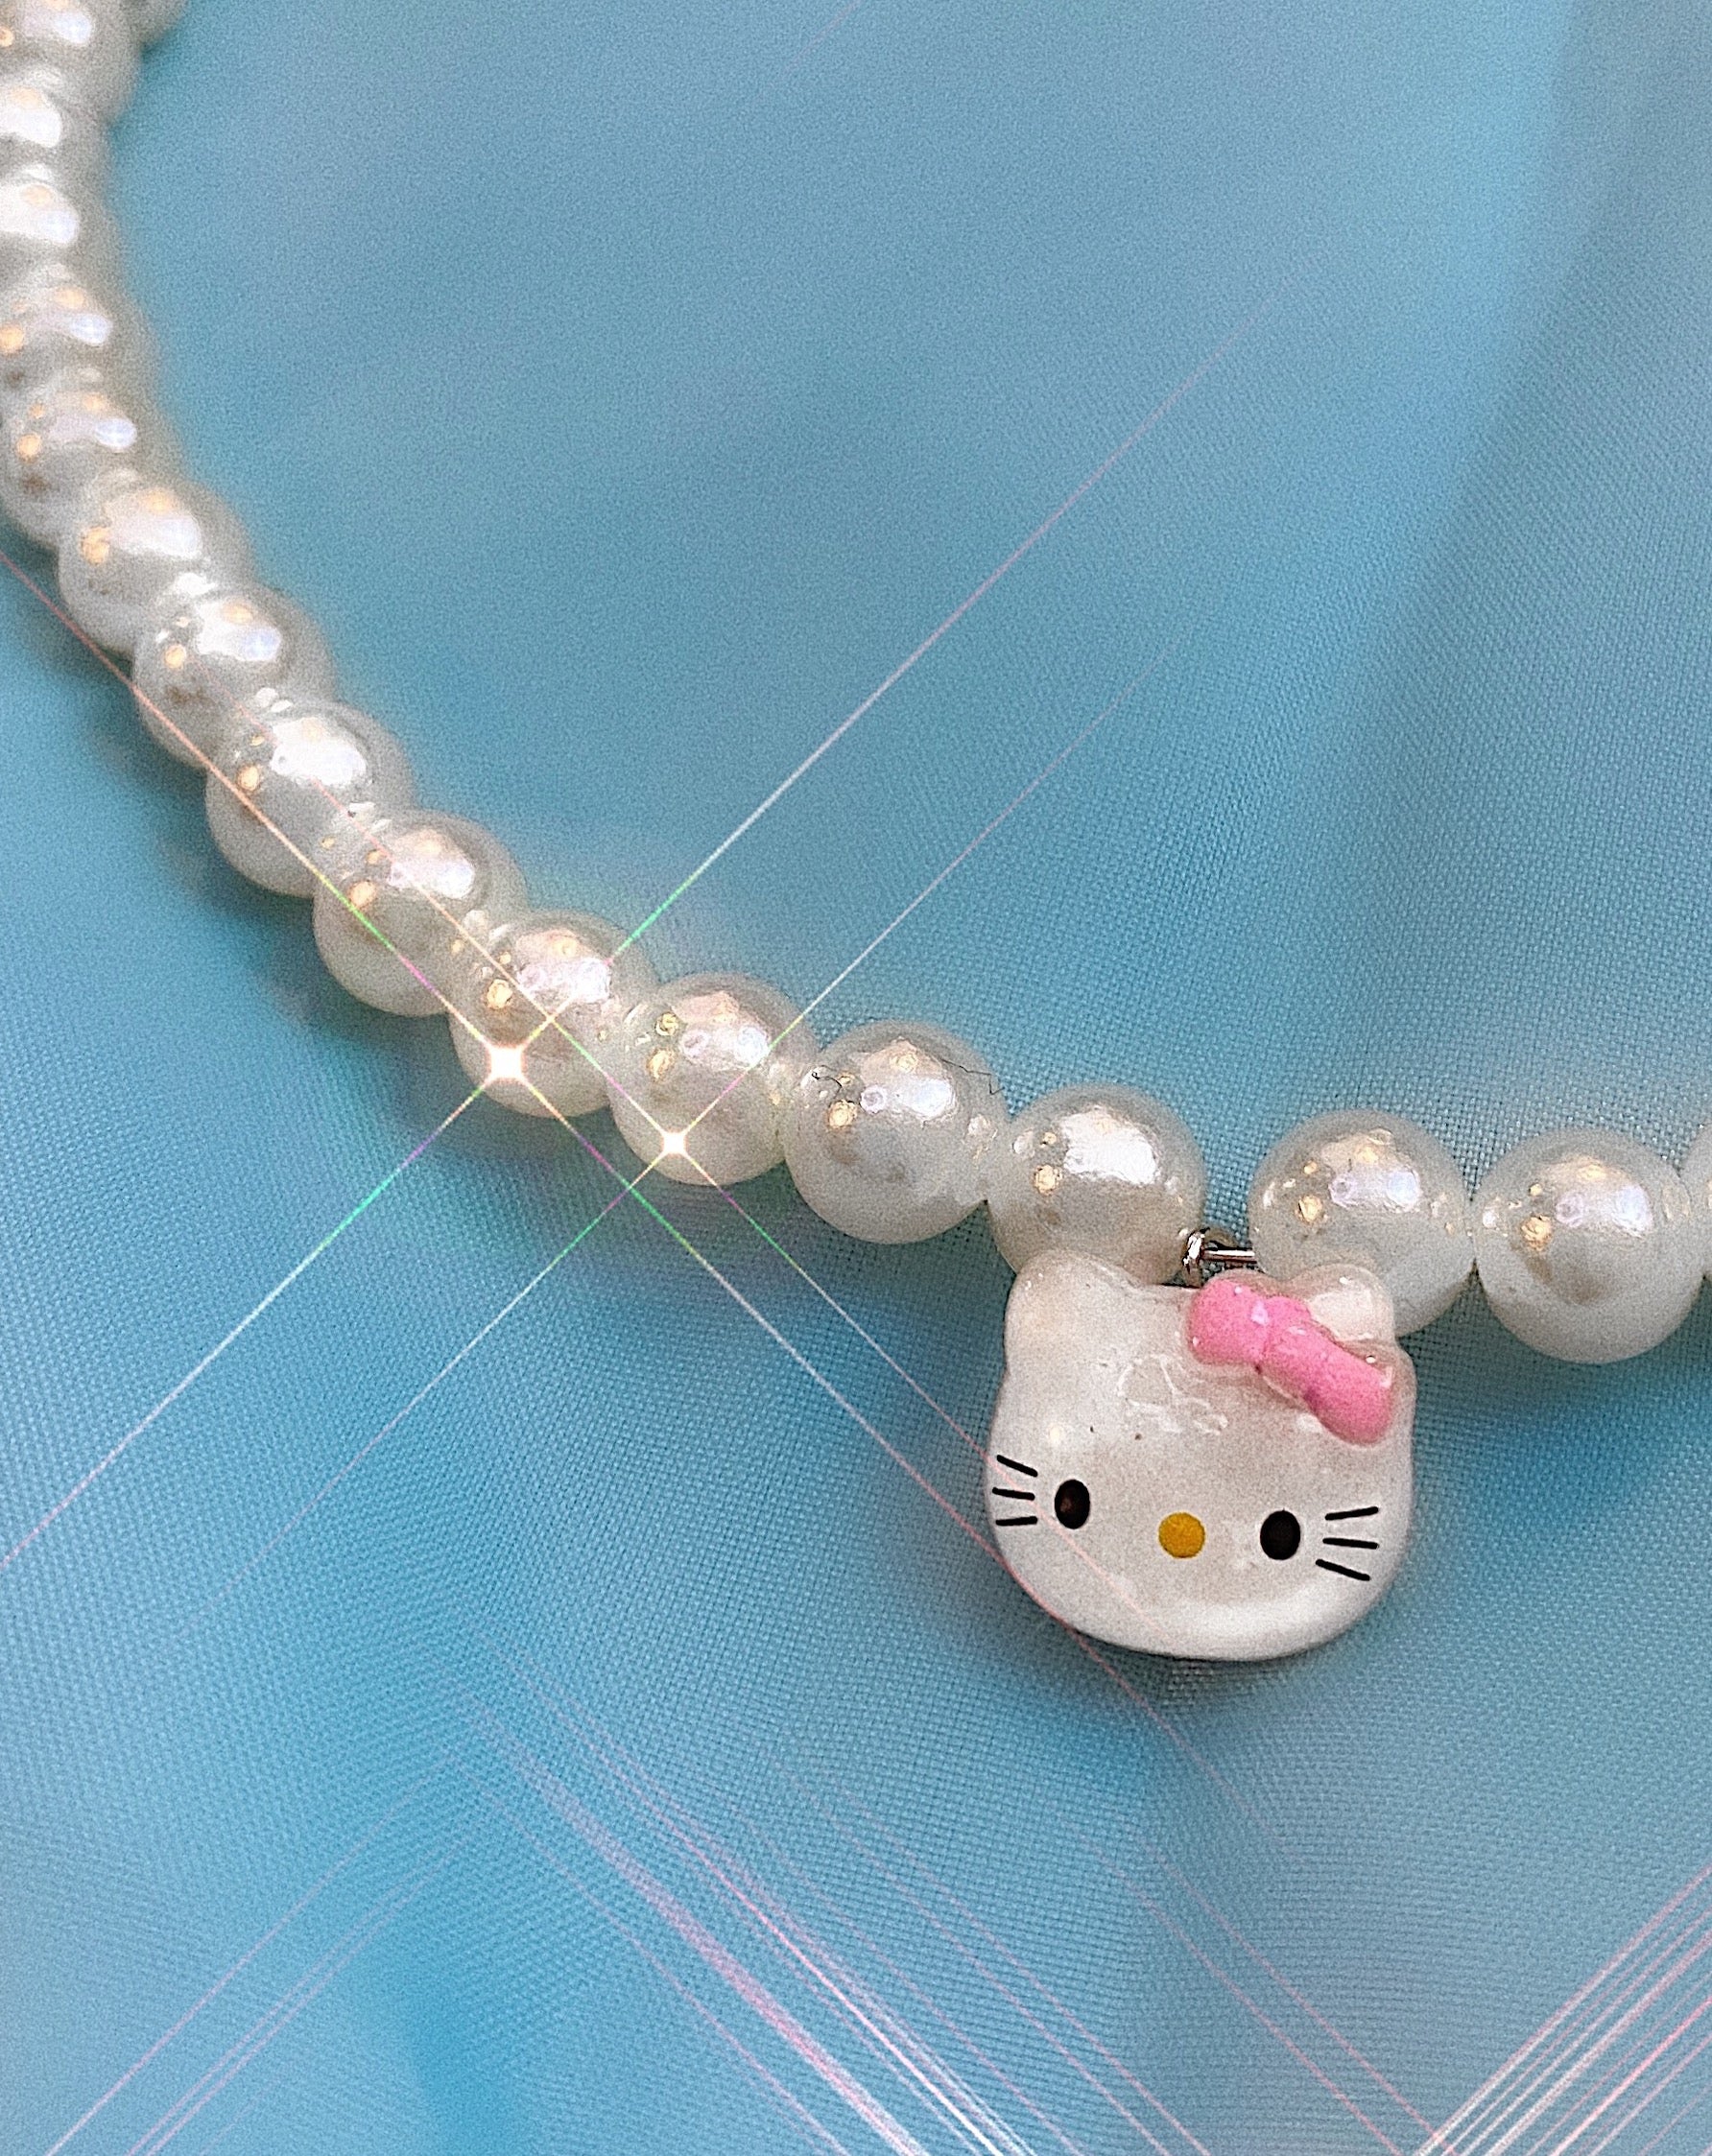 Girly Pearl Necklace 16